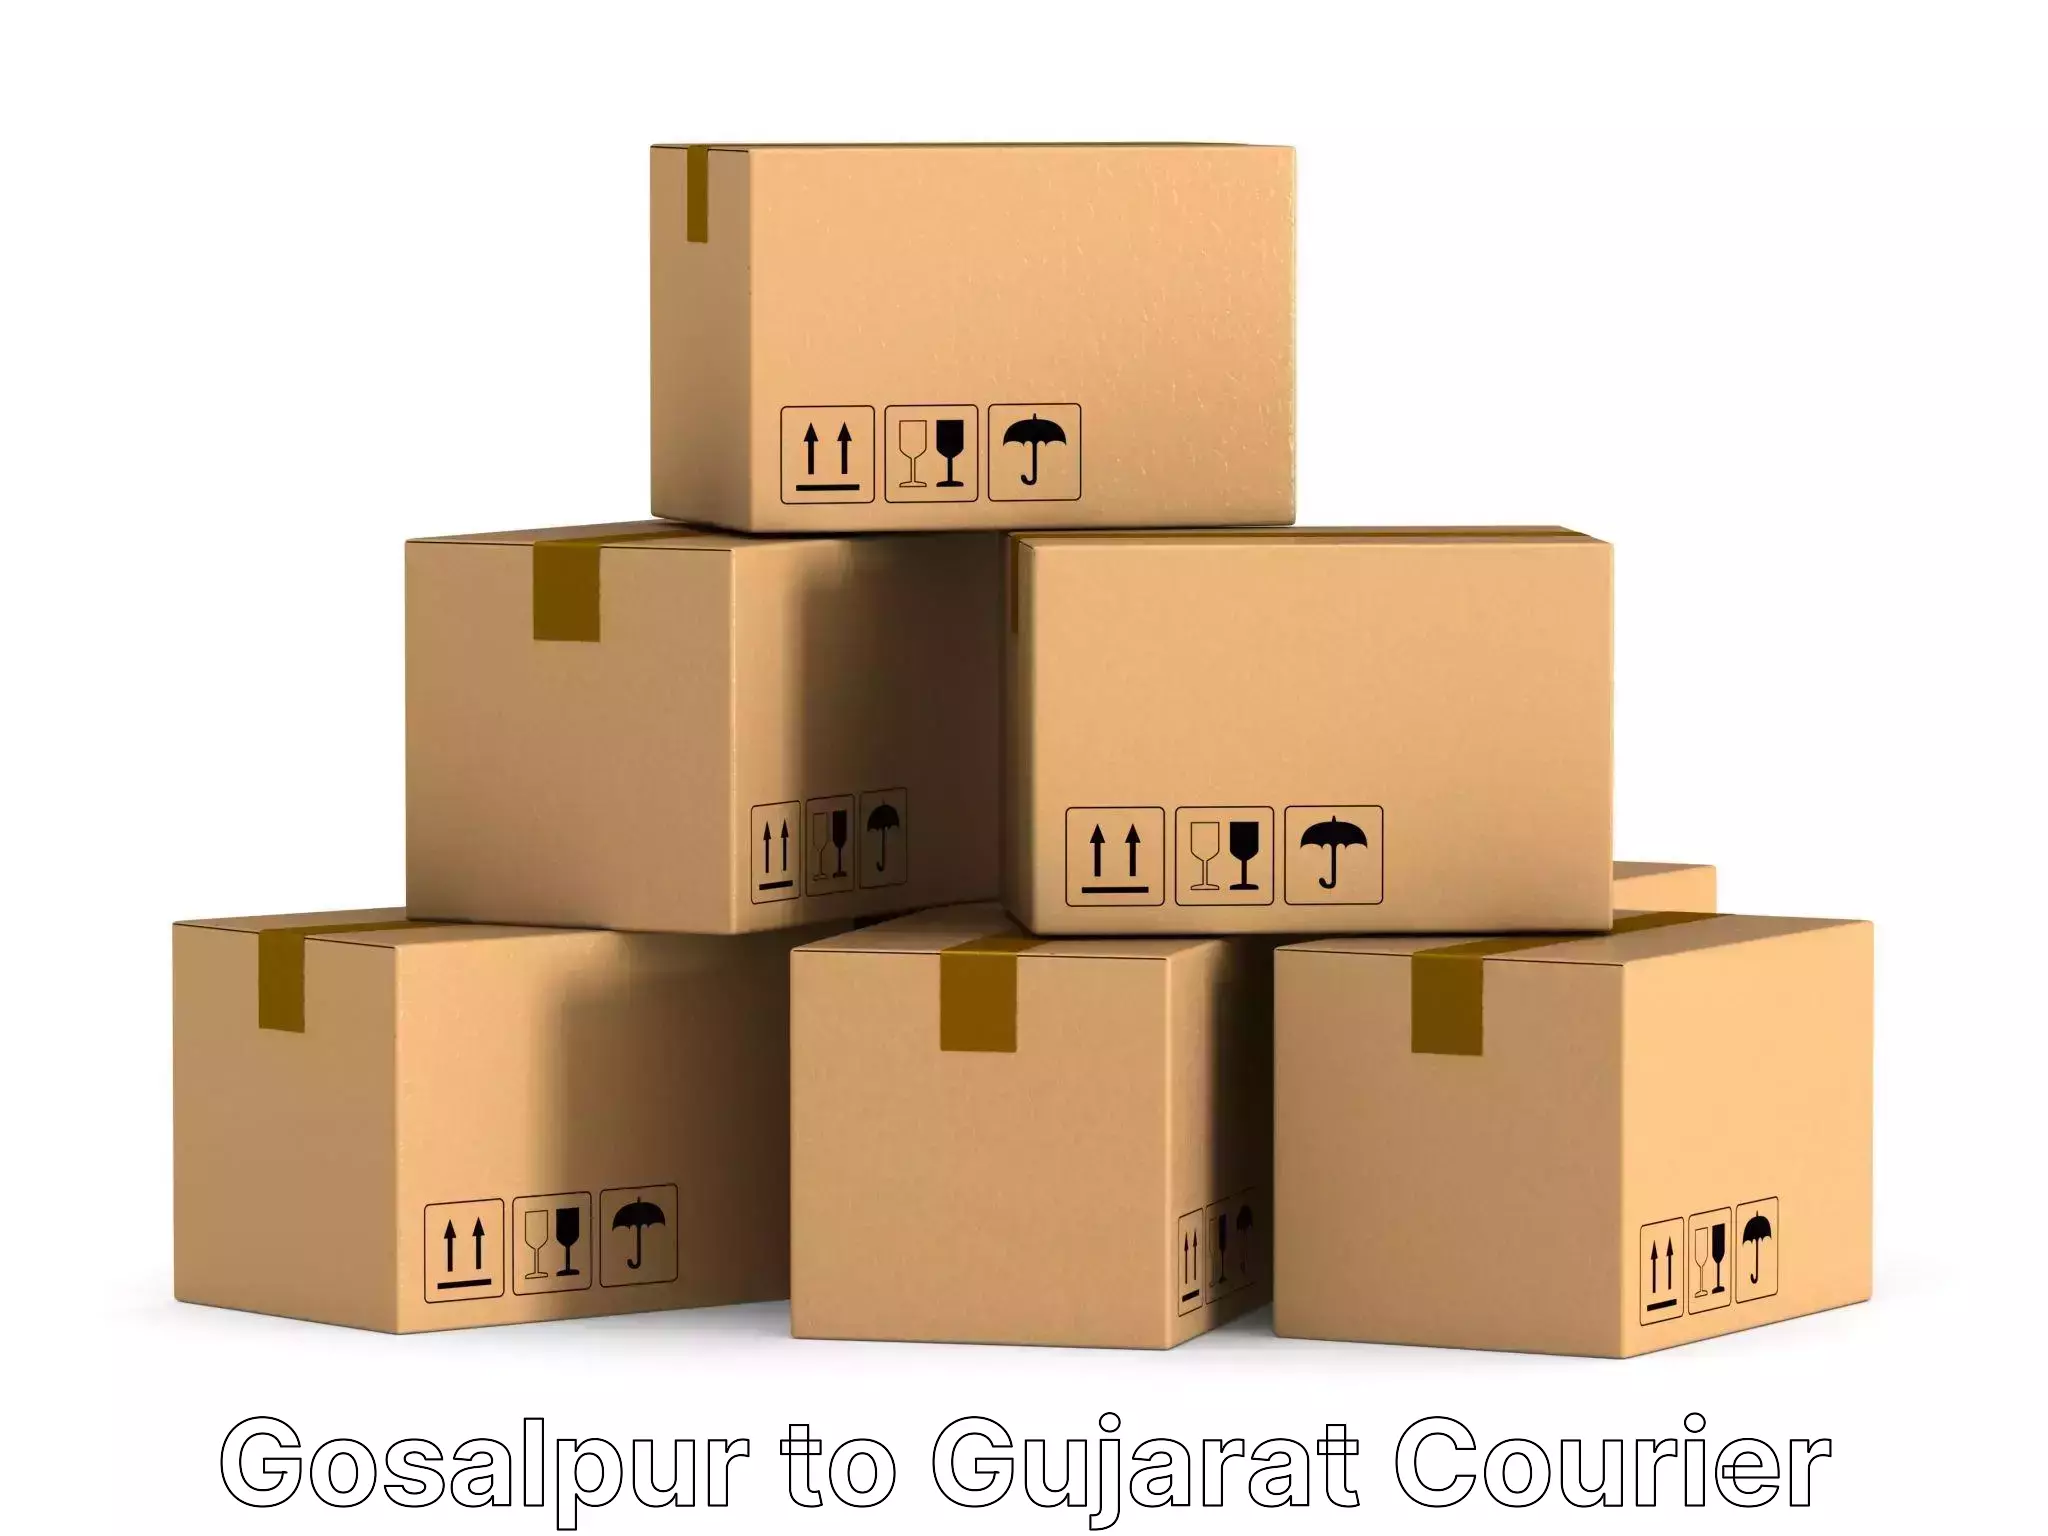 Quality relocation services Gosalpur to Mehsana